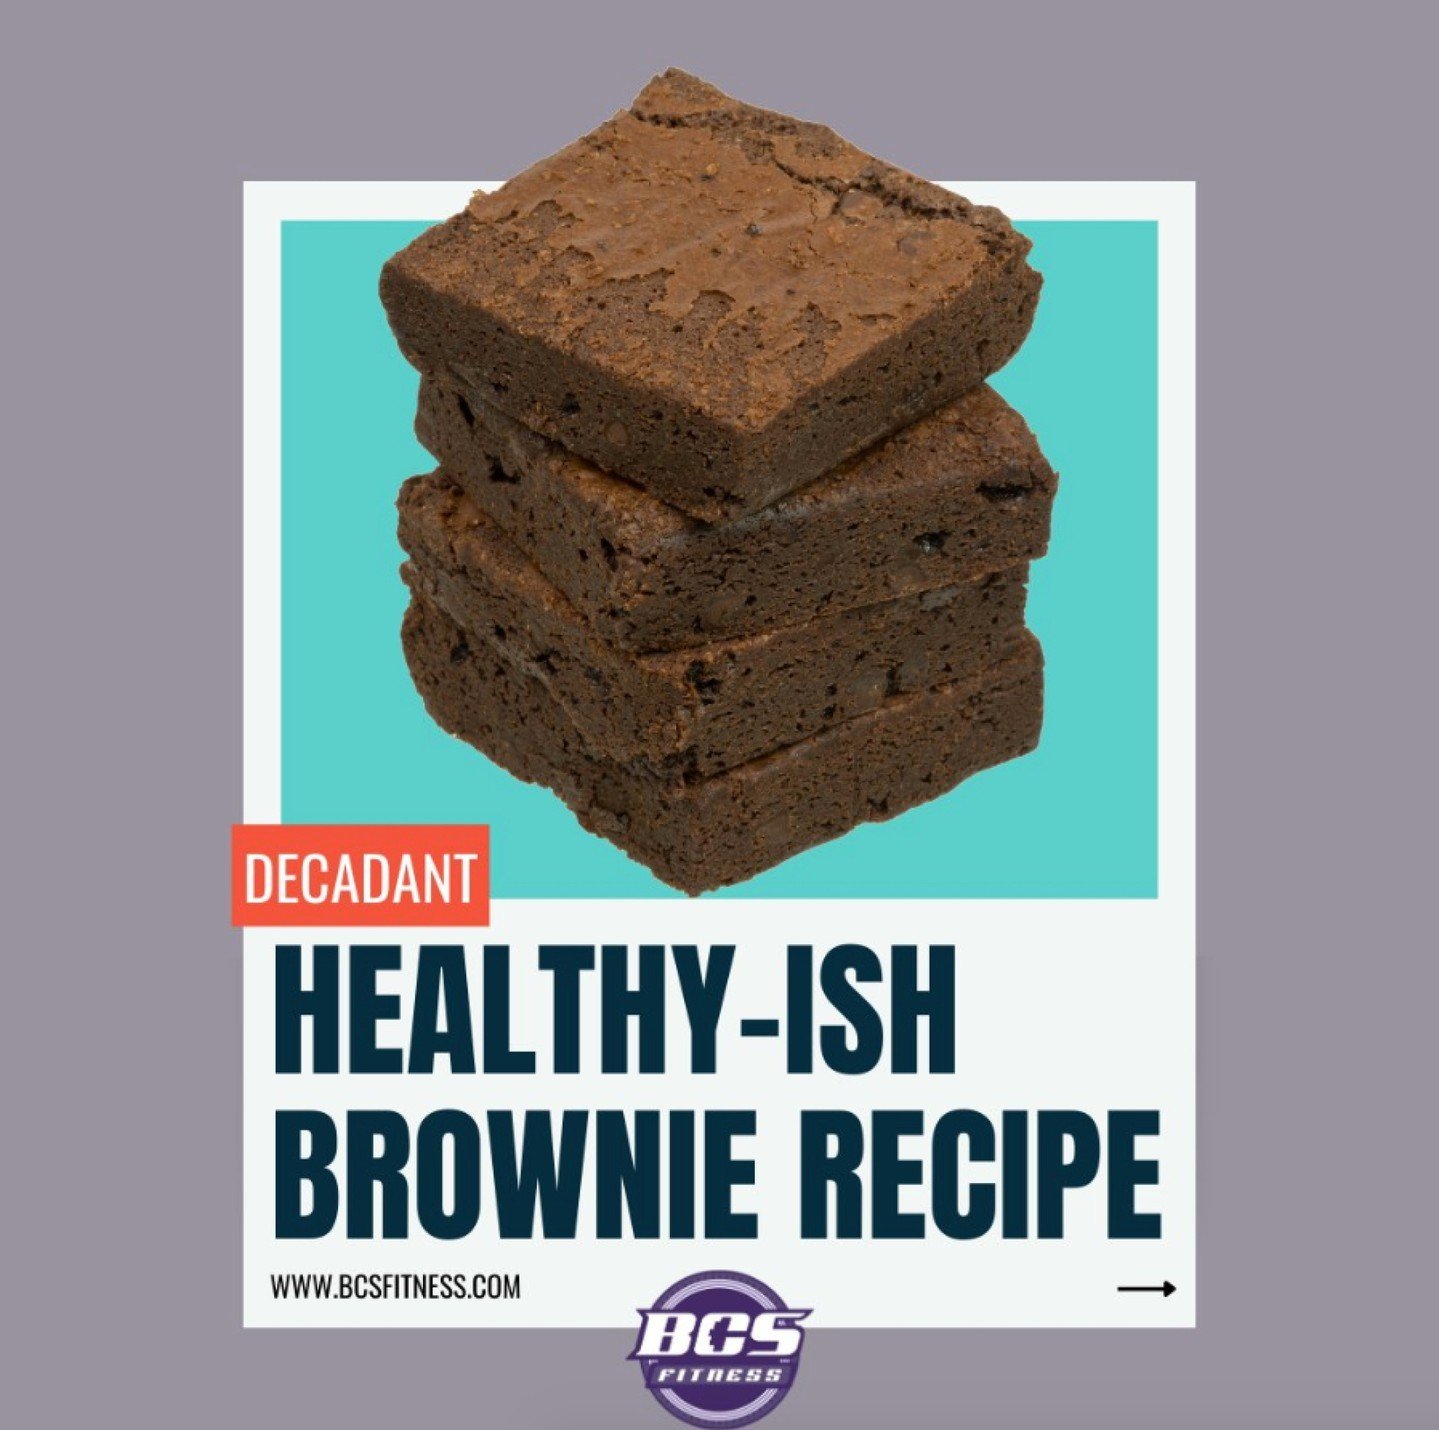 Probably never thought we&rsquo;d post a recipe for brownies, did you? 🤣

These aren&rsquo;t just any old brownies &mdash; they are chocolatey, rich, and decadent.

And they contain a &ldquo;surprise&rdquo; healthy ingredient: SWEET POTATOES.

Wait,